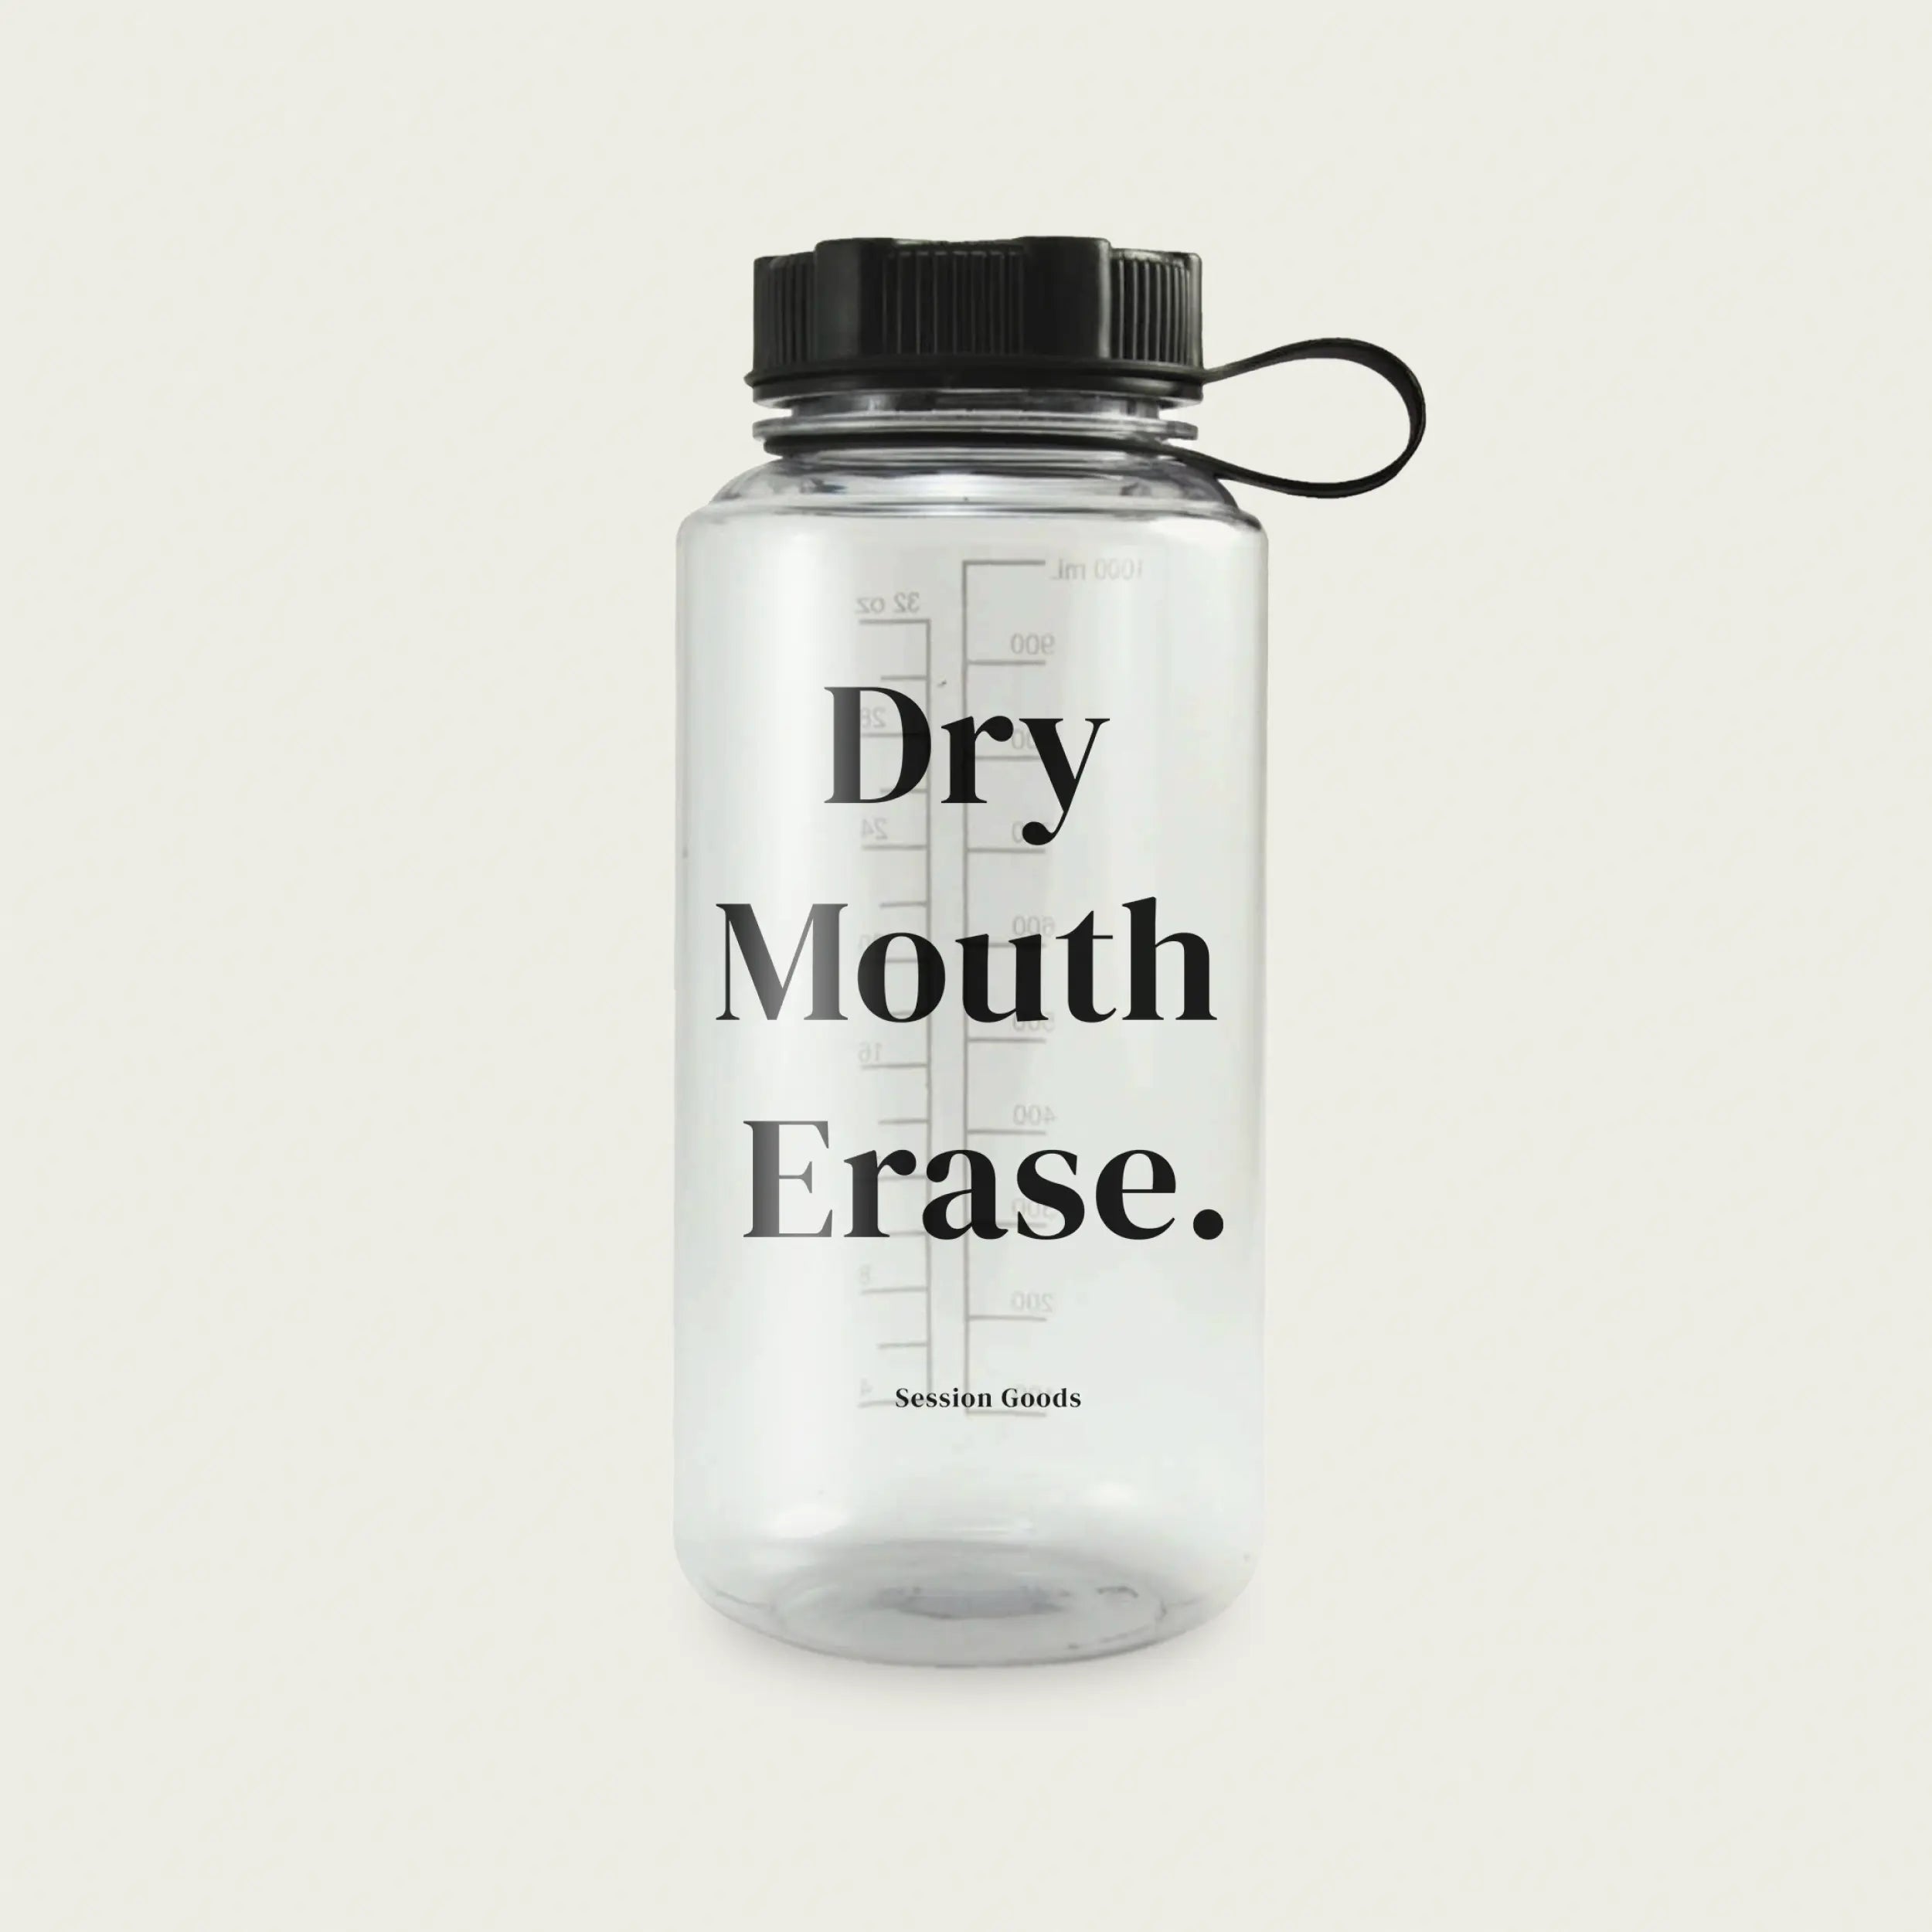 Session Goods Dry Mouth Erase.™ Water Bottle